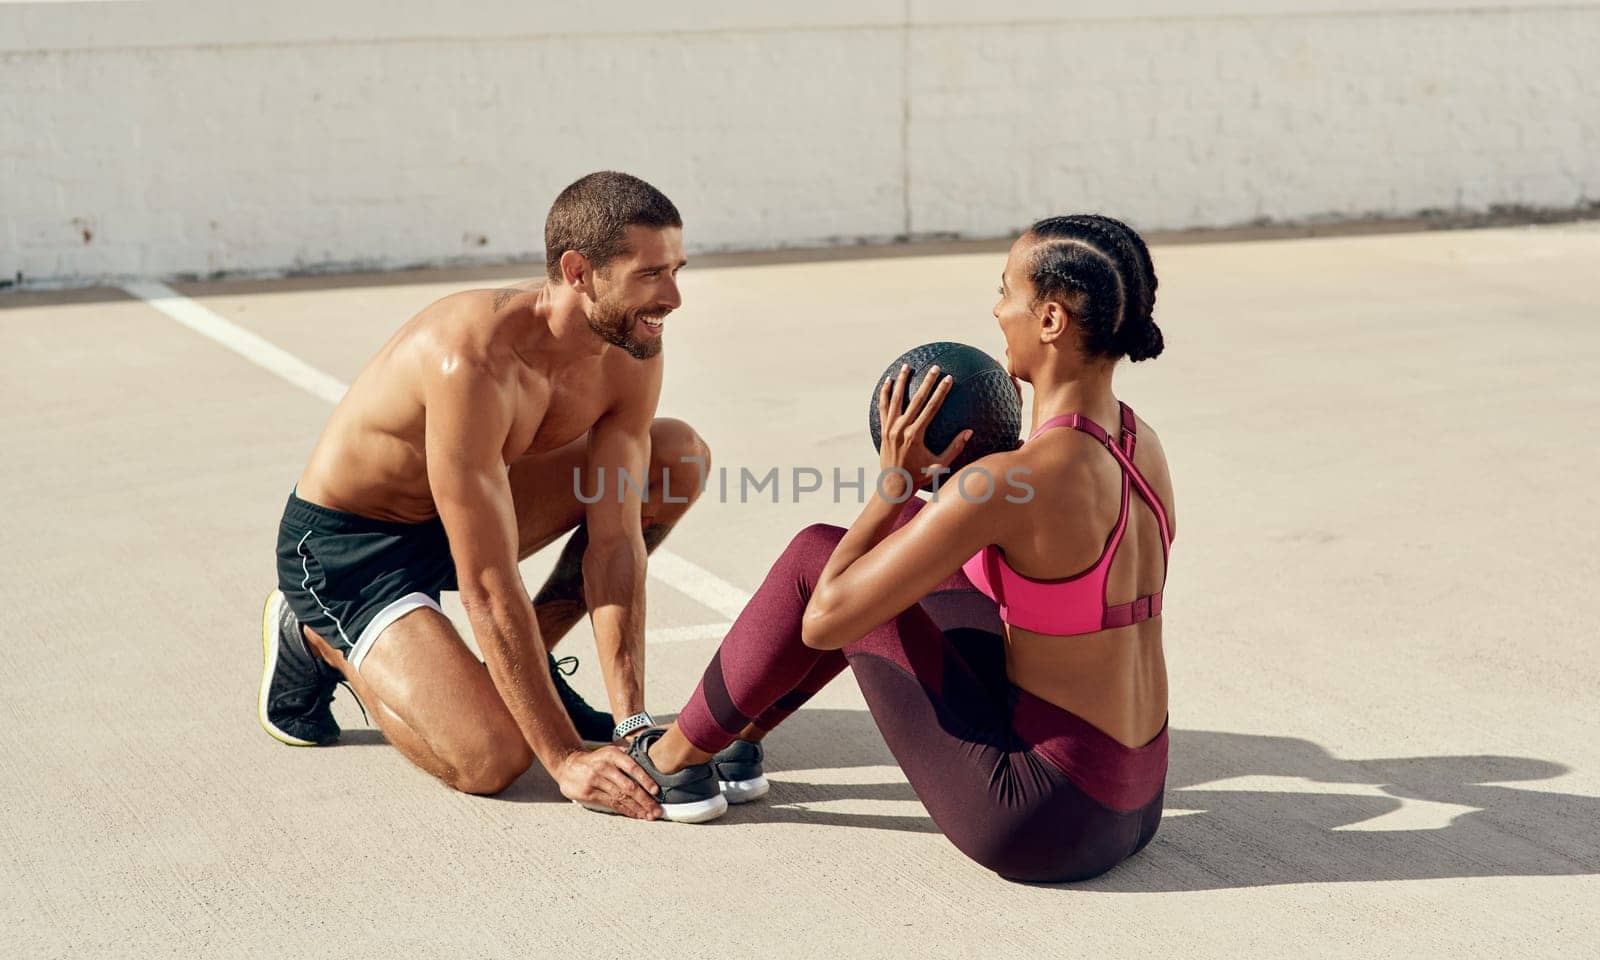 Medicine ball, outdoor and exercise for woman, balance and training in gym, workout and fitness for body. Sports, athlete and personal trainer for strength, wellness and building of muscle for sports.